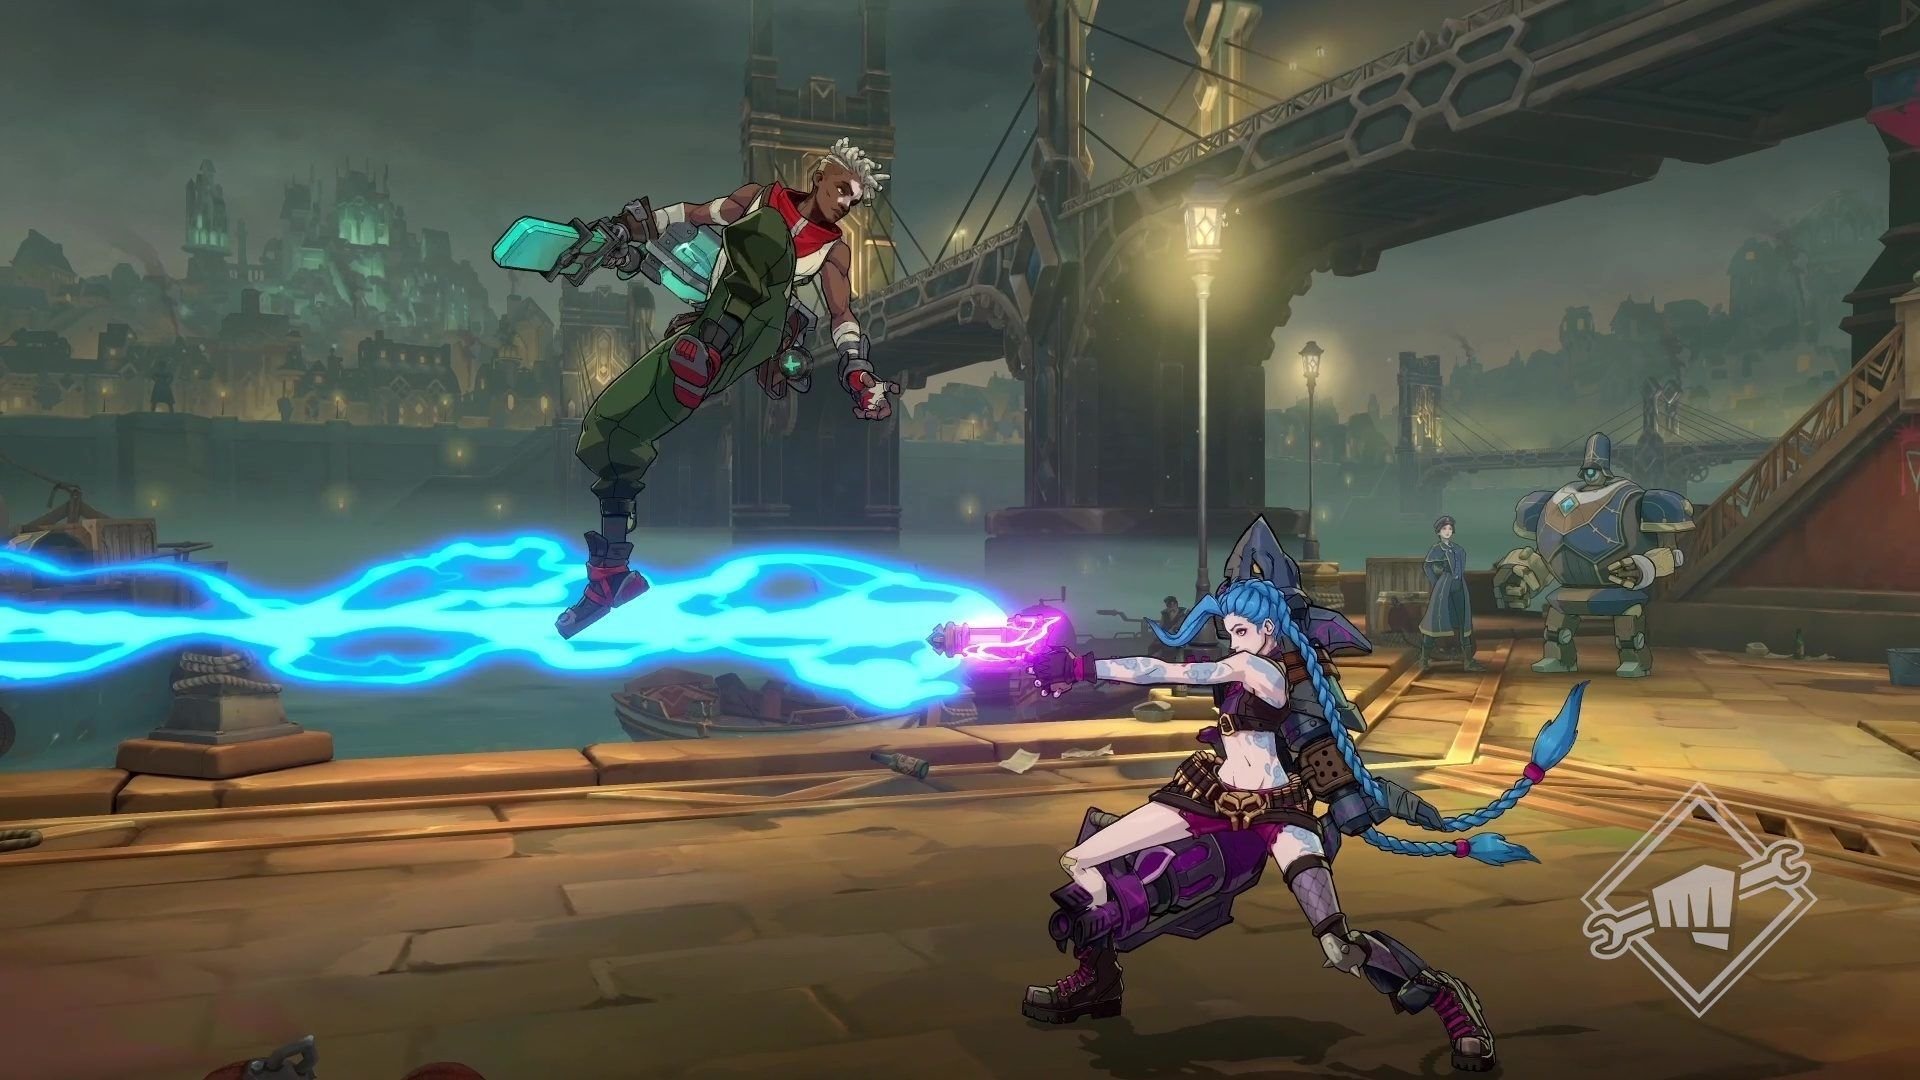 Riot Games has published a gameplay video of a fighting game based on League of Legends